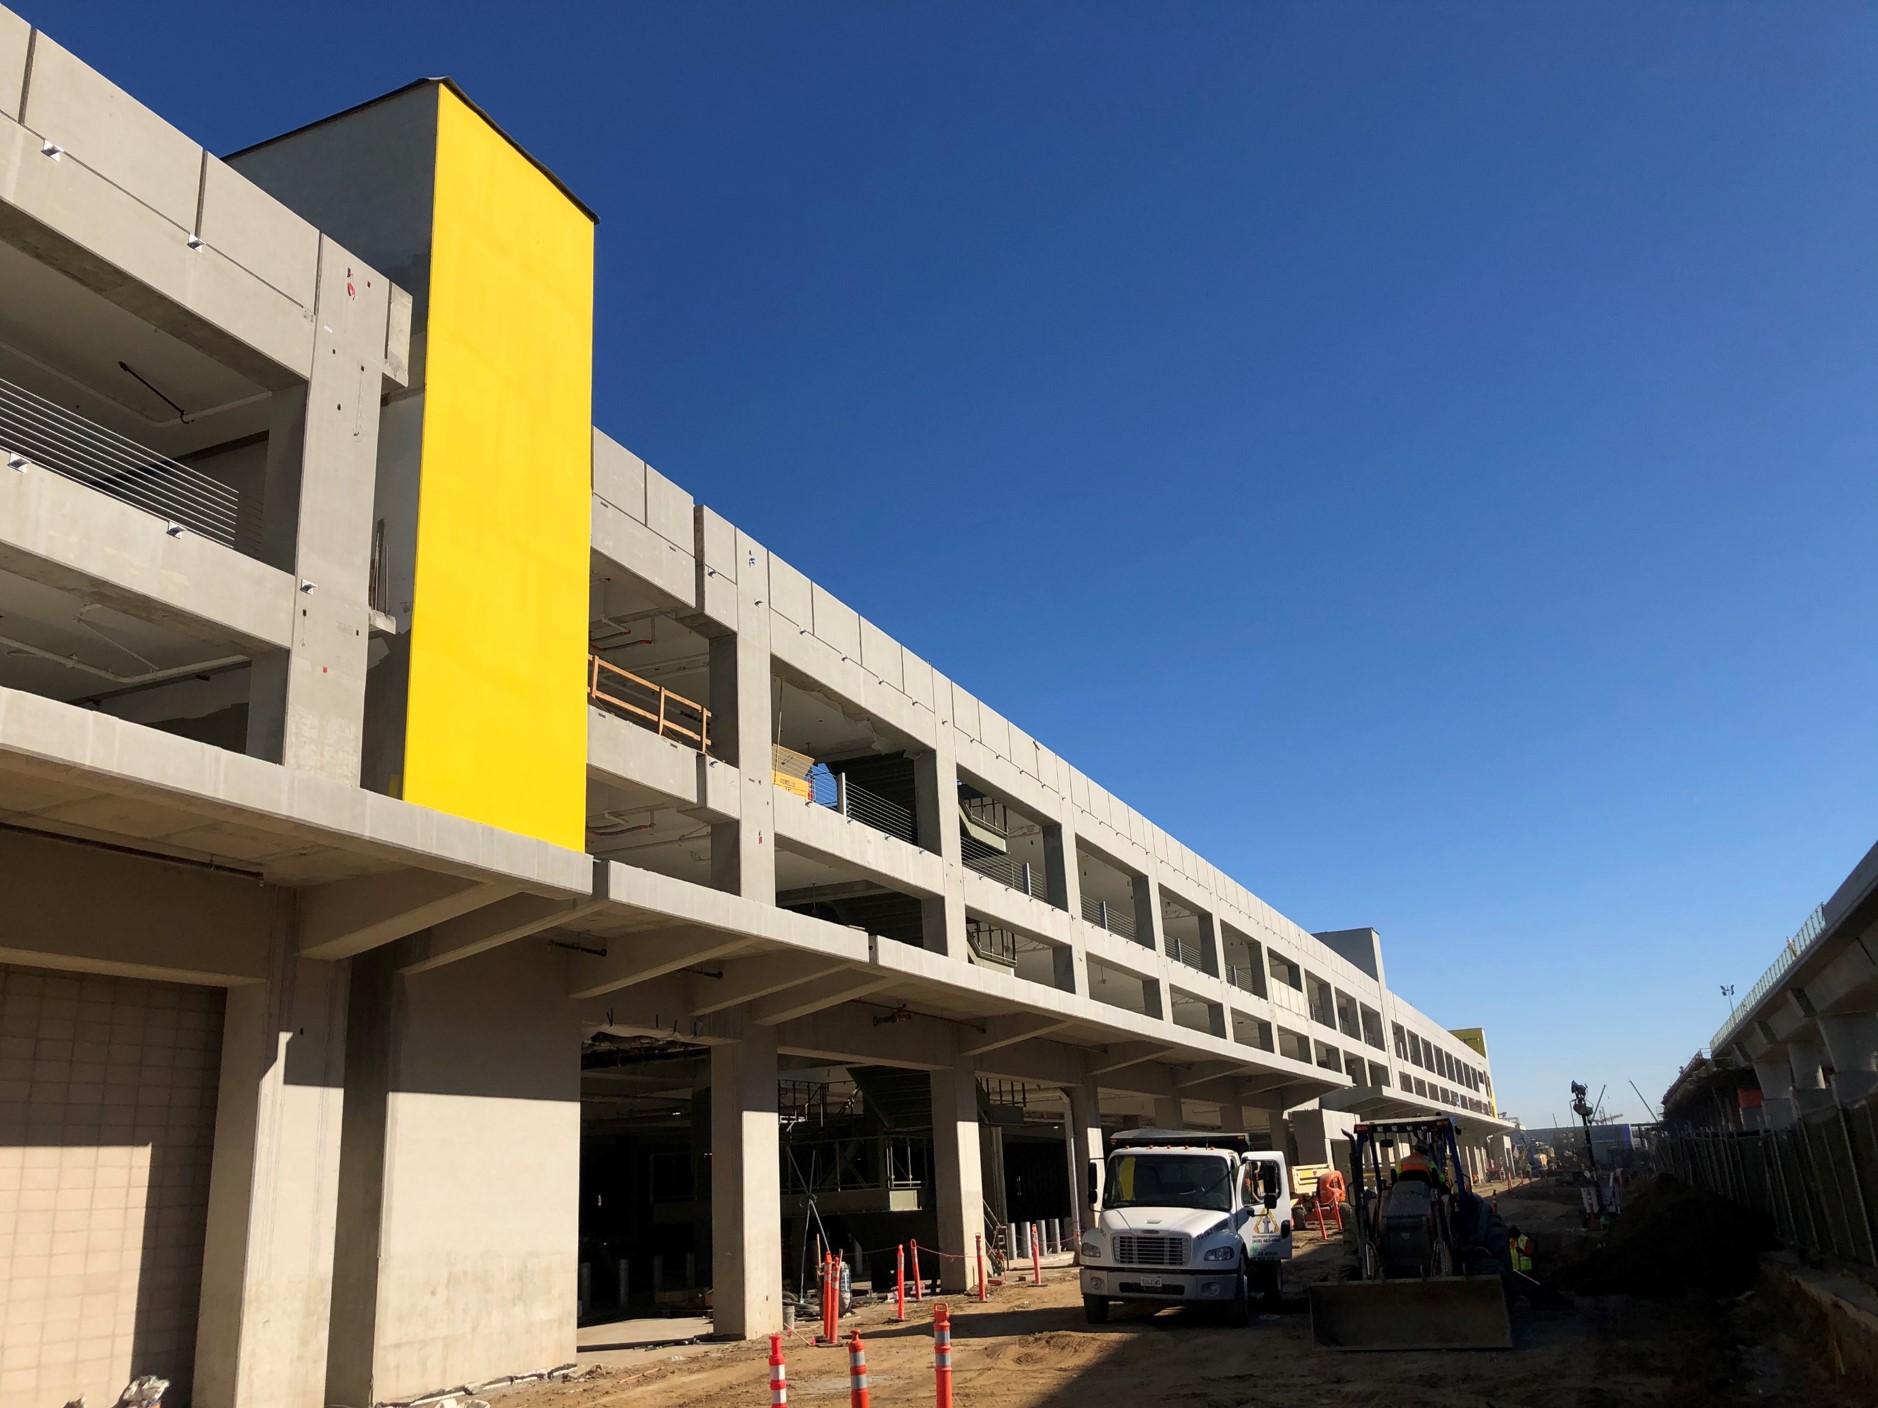 The south side of the Intermodal Transportation Facility-West and an elevator core (yellow).